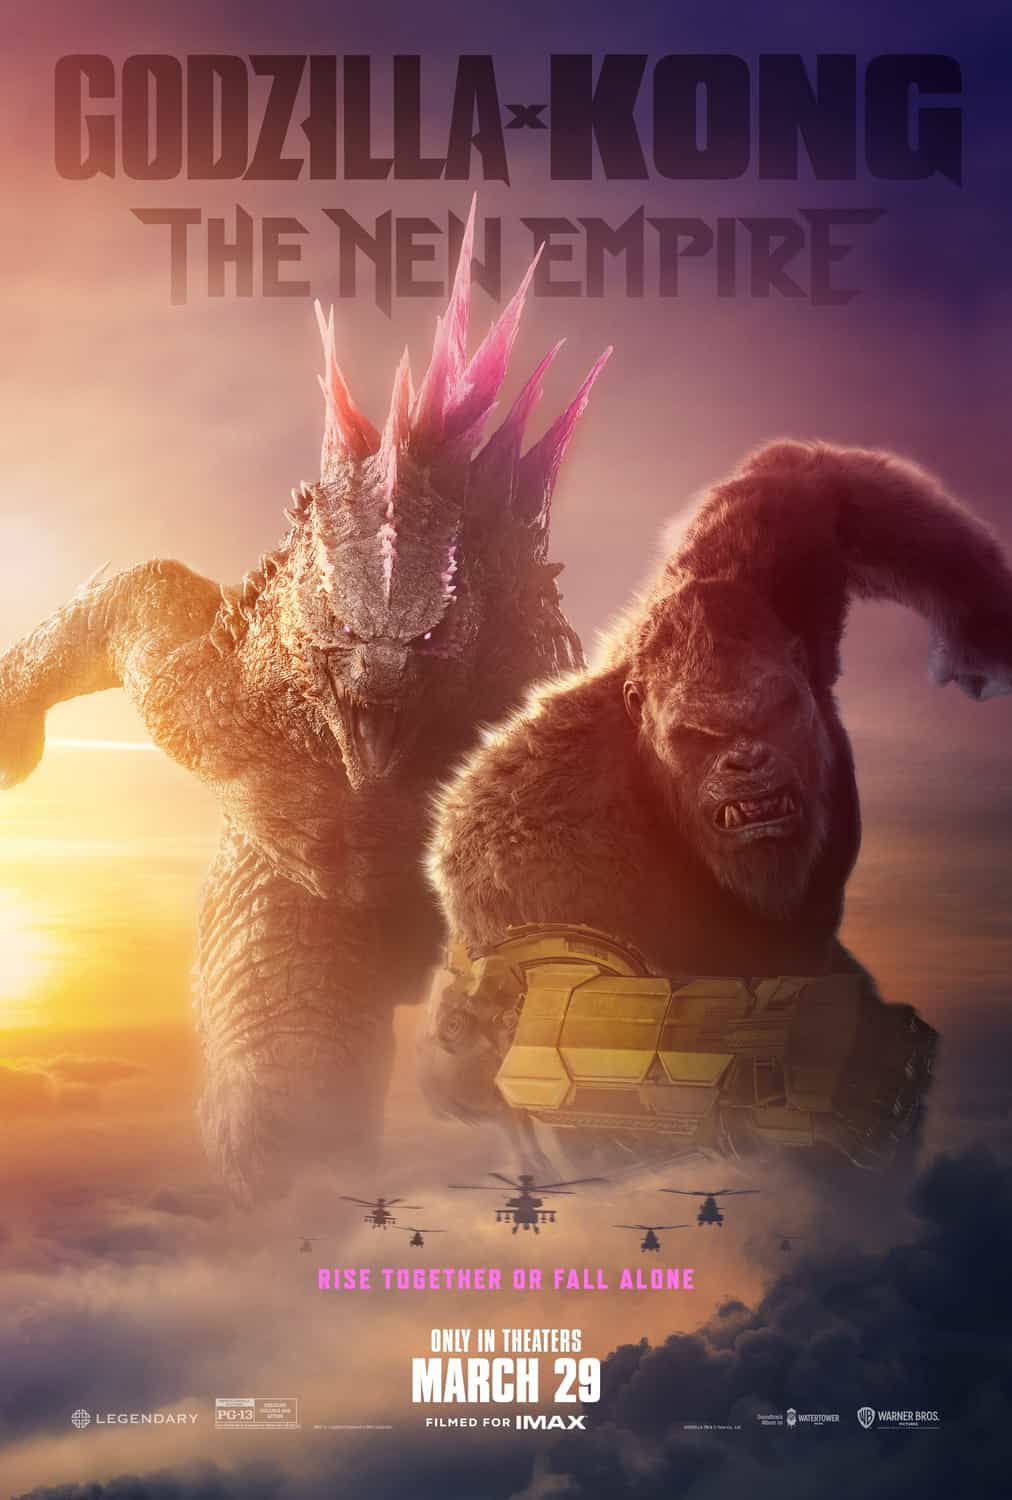 Global Box Office Weekend Report 12th - 14th April 2024:  Godzilla X Kong: The New Empire spends its third weekend at the top of the global box office while Civil War is the top new movie at number 3